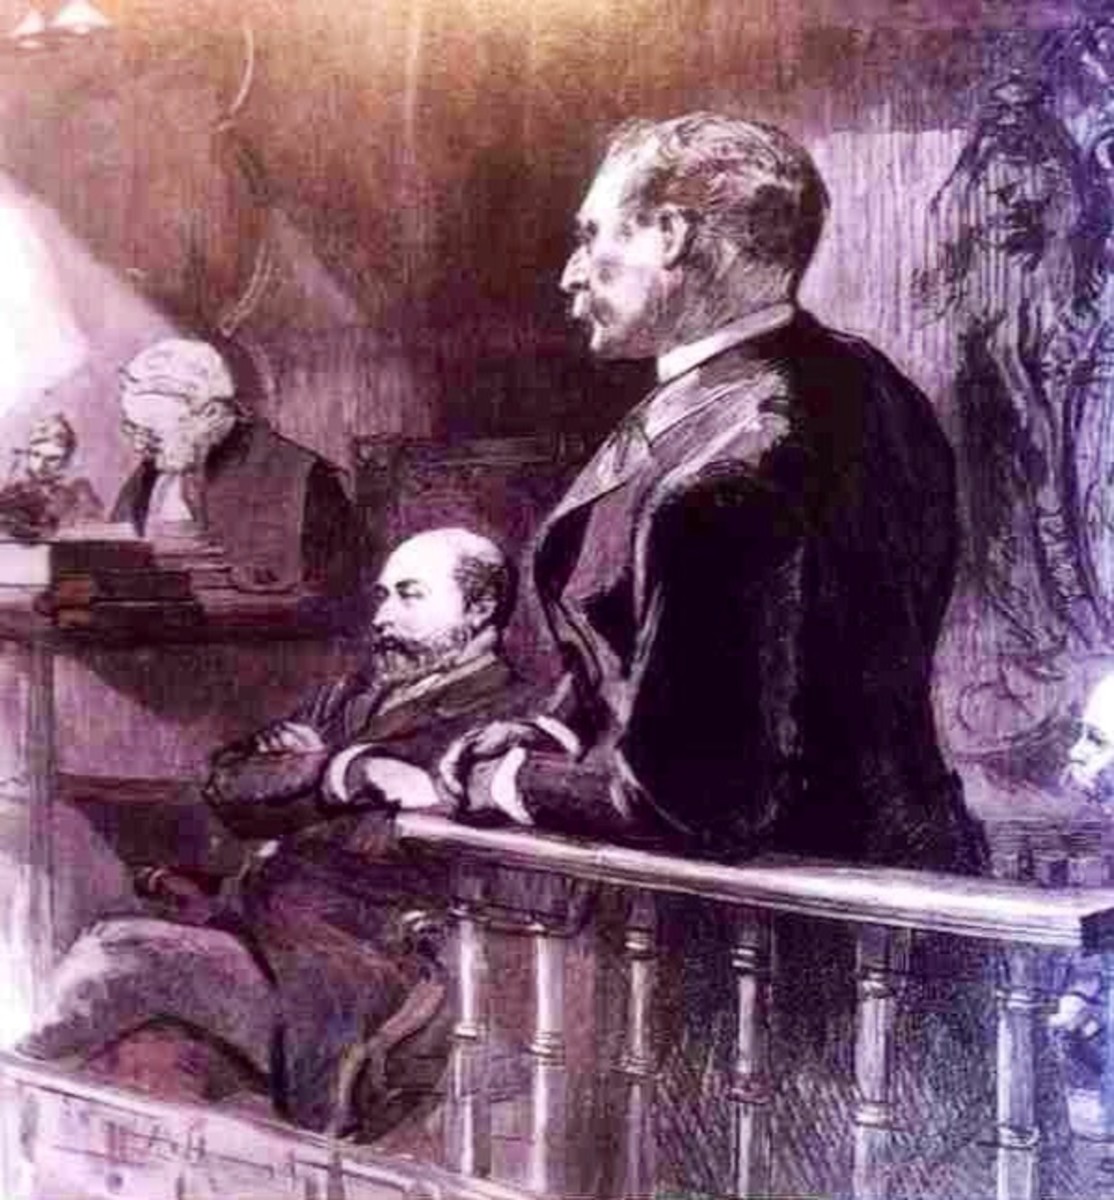 Gordon-Cumming in the witness box. Next to him is the Prince of Wales, and behind the prince an apparently dozing judge.